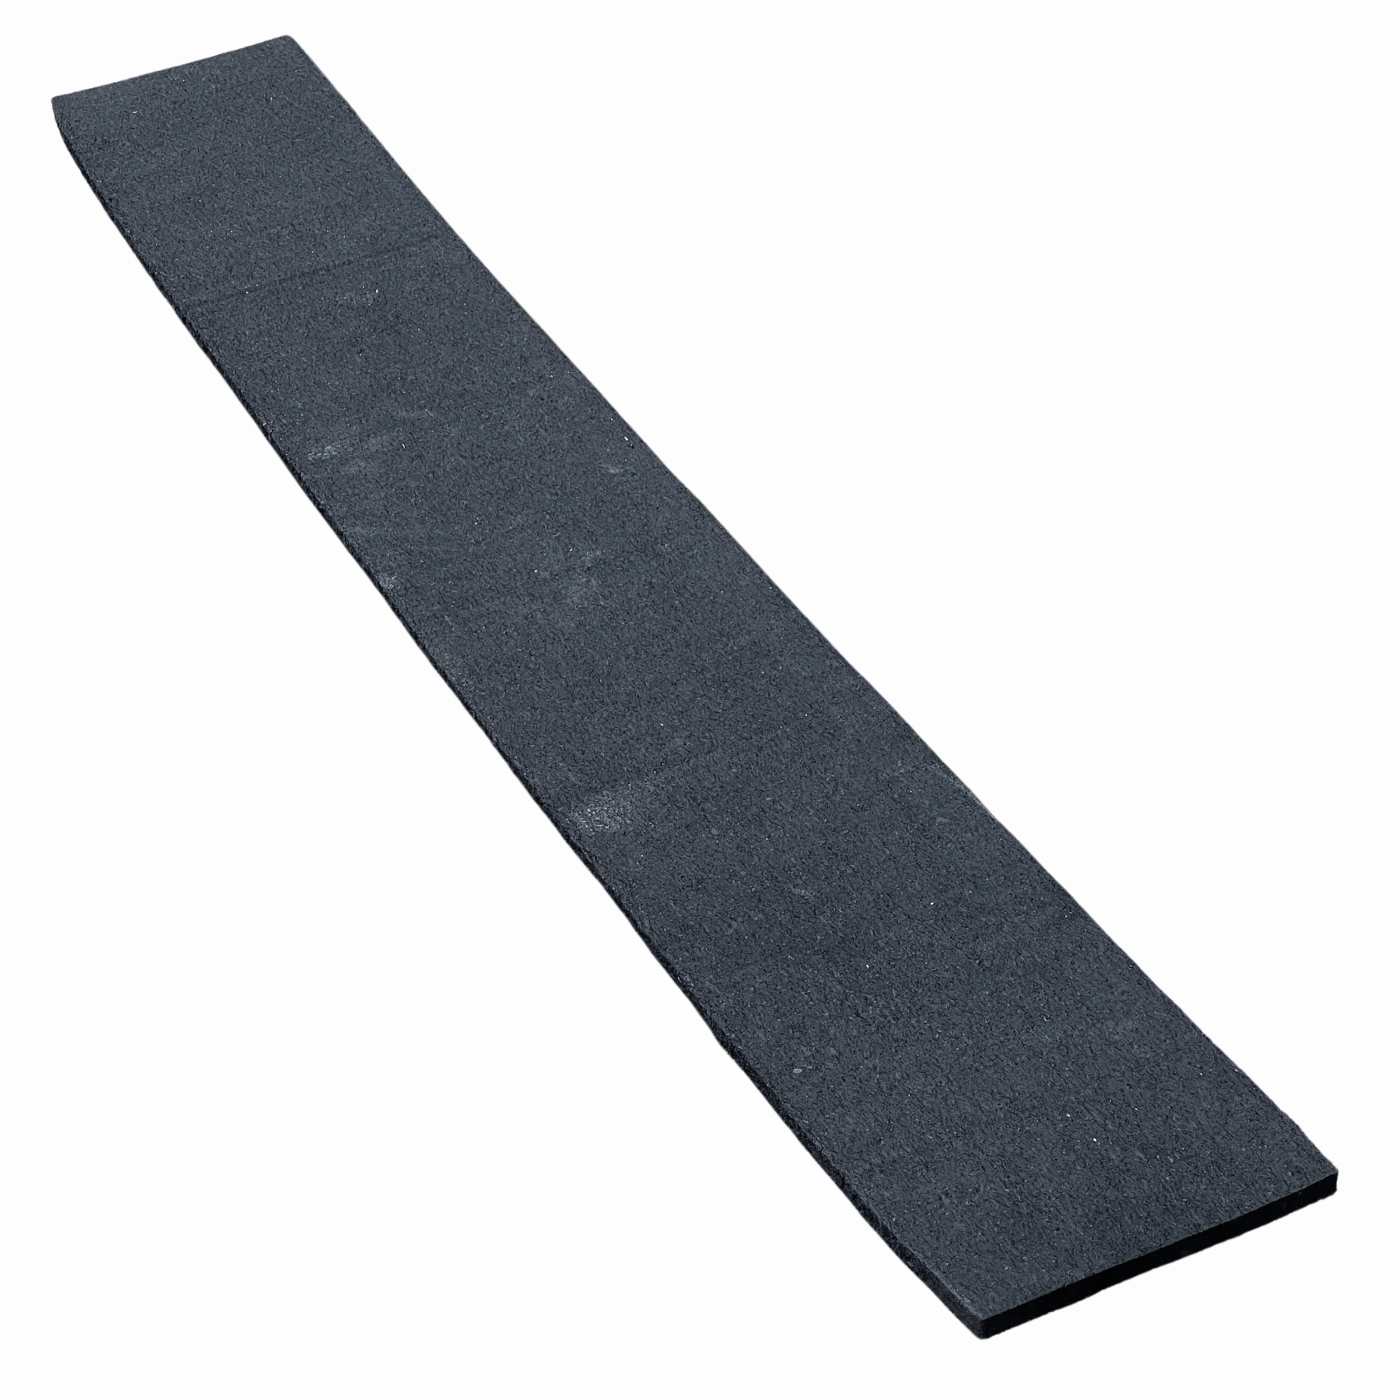 Rubber Friction Pad 6 x 48 x 0.5